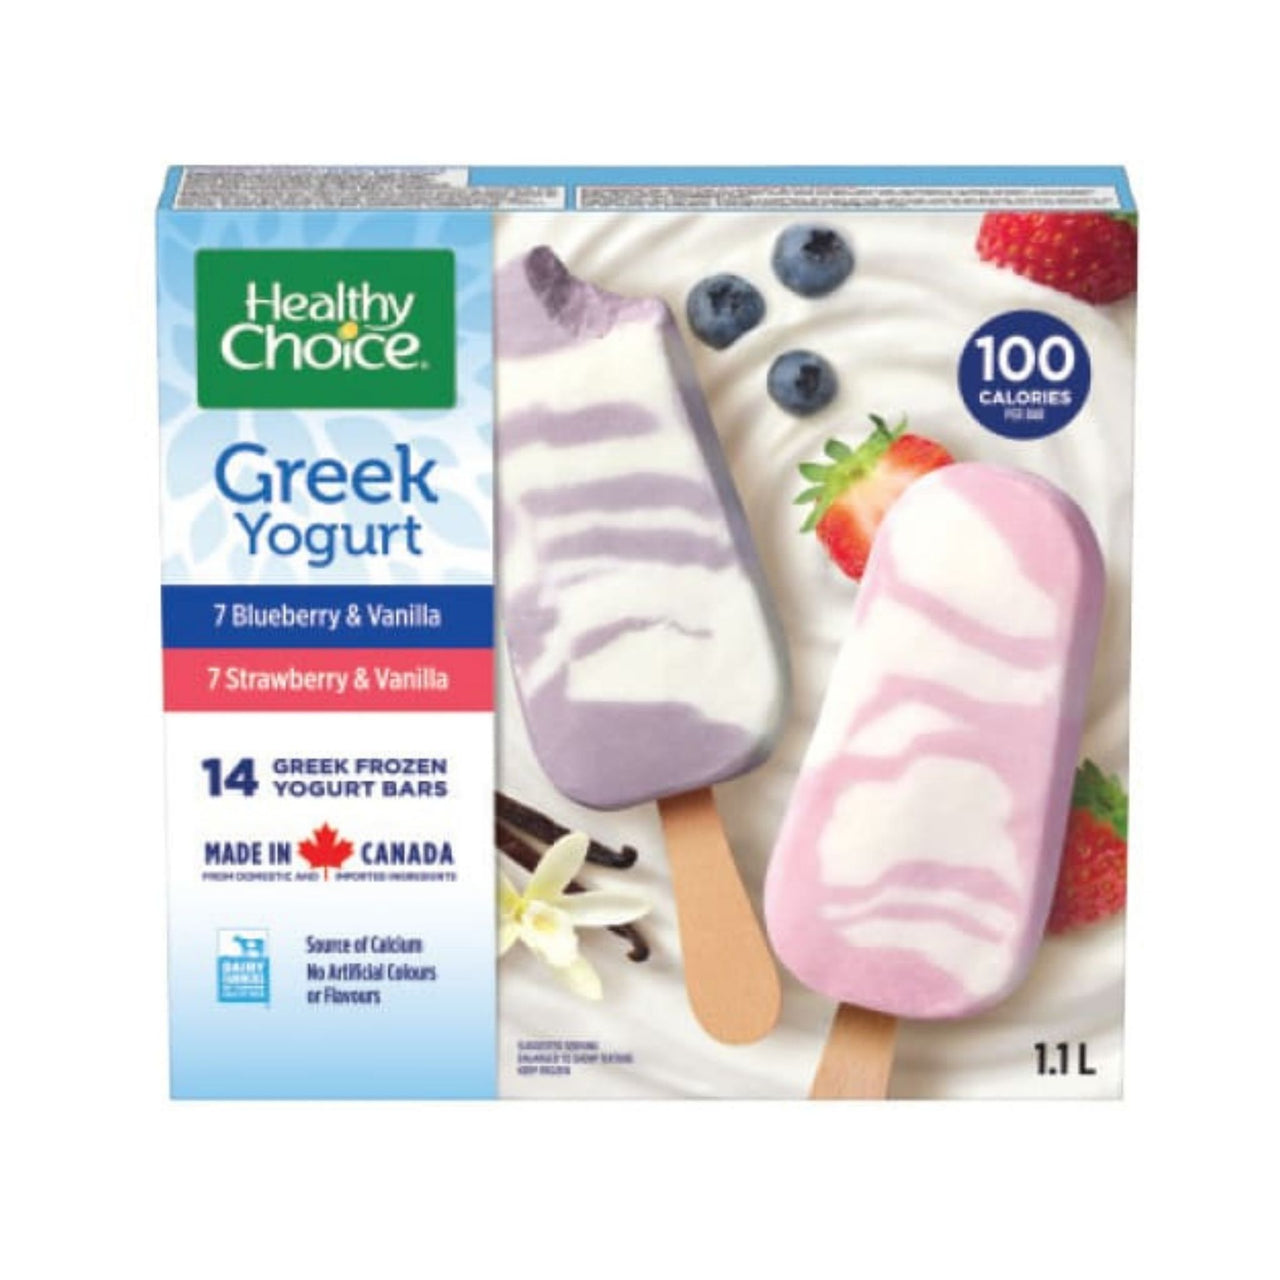 Image of Healthy Choice Frozen Yogurt Bars (ship at your own risk)